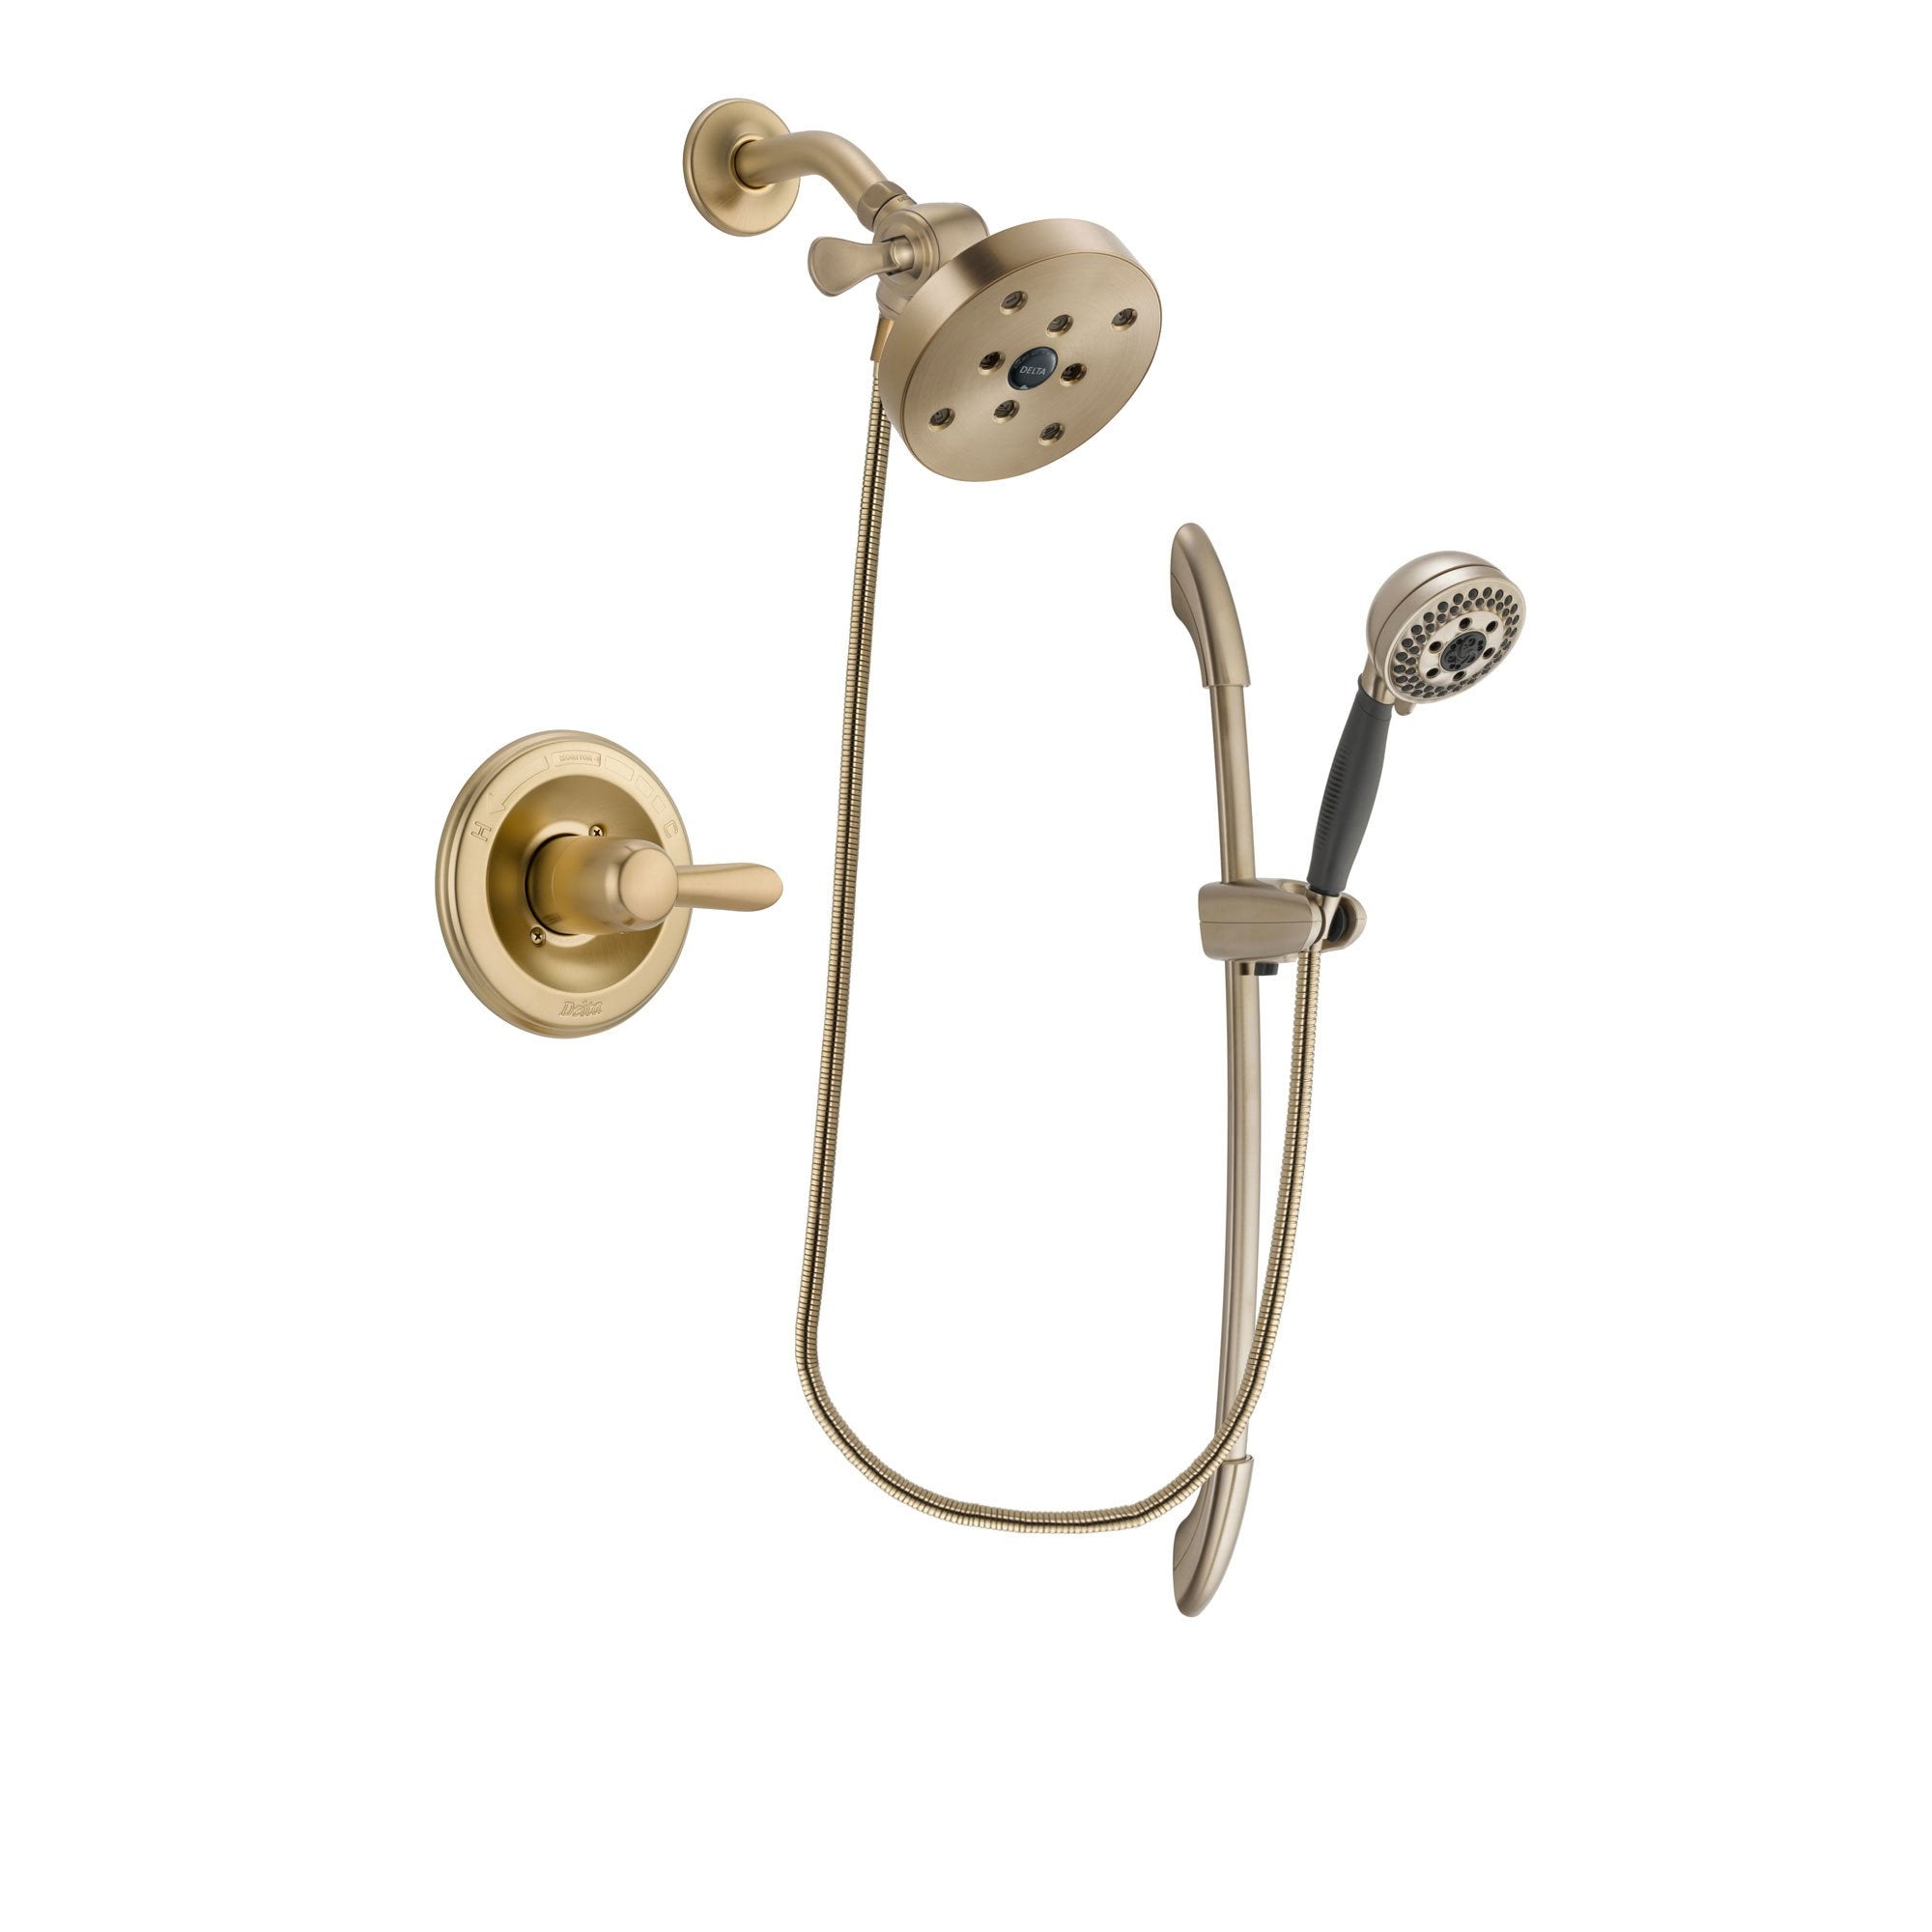 Delta Lahara Champagne Bronze Finish Shower Faucet System Package with 5-1/2 inch Showerhead and 5-Spray Handshower with Slide Bar Includes Rough-in Valve DSP3404V